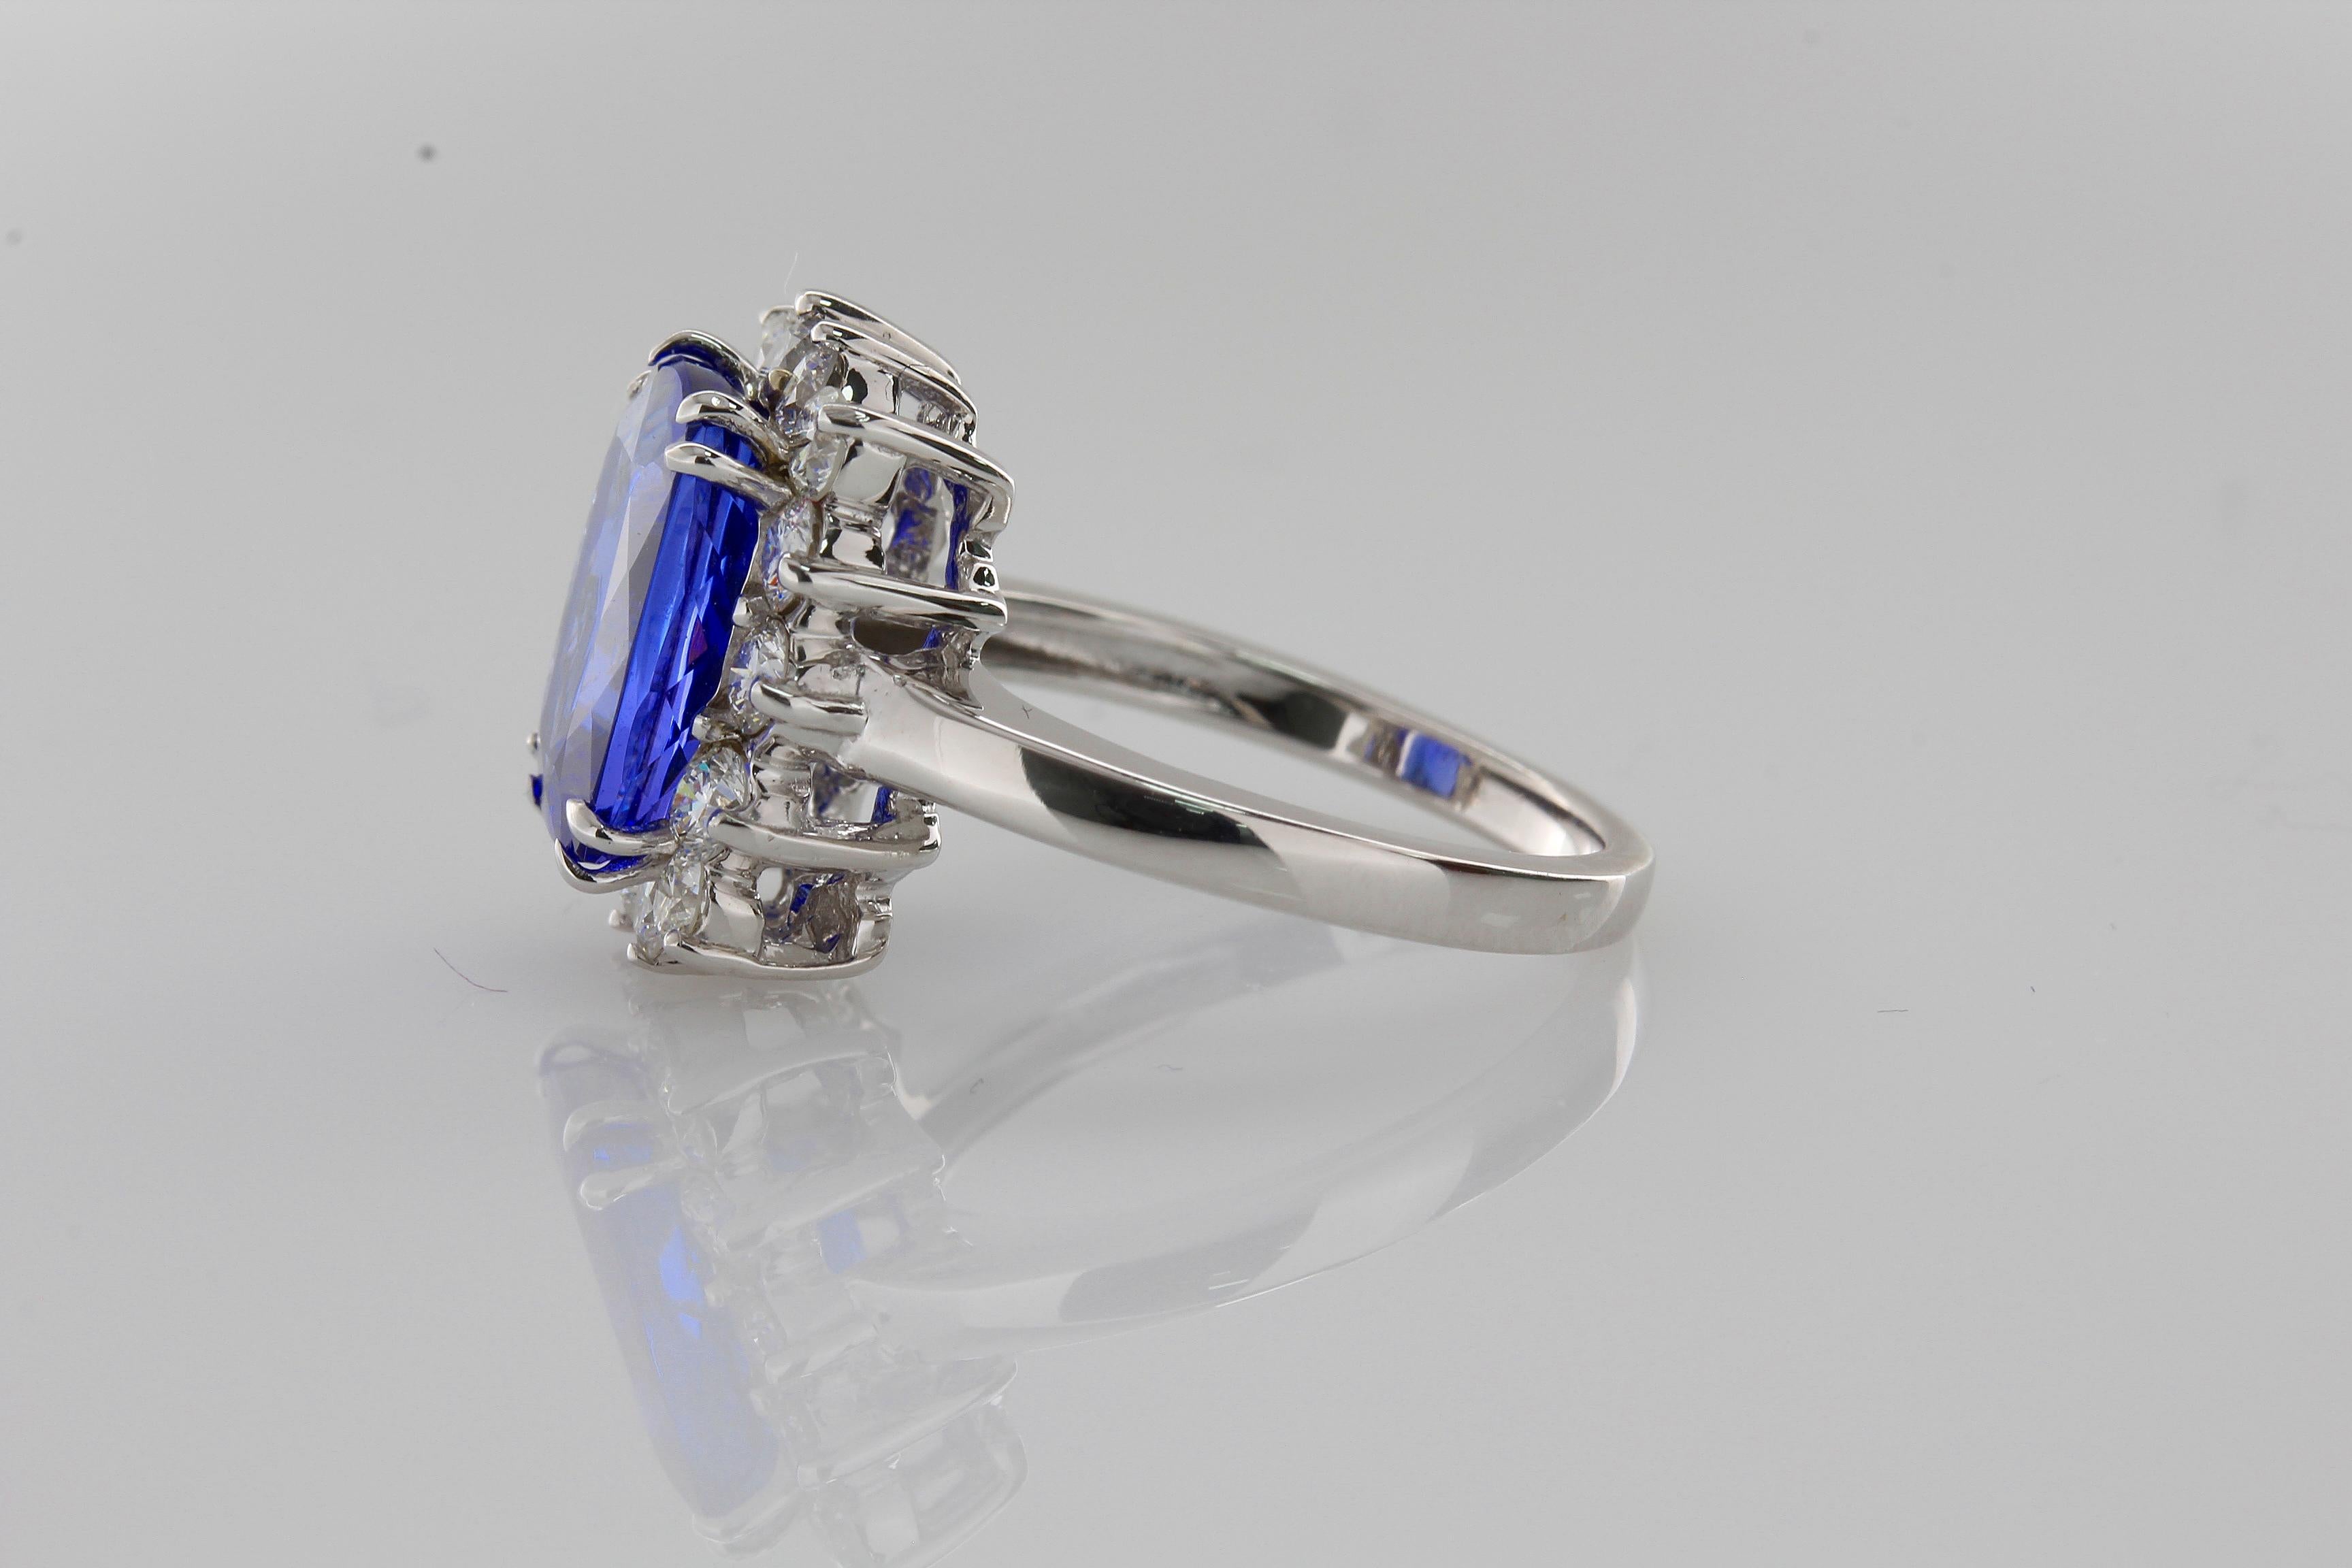 4.52 Carat Cushion Cut Violet Blue Tanzanite Gemstone 14 Karat White Gold Ring In New Condition For Sale In New York, NY